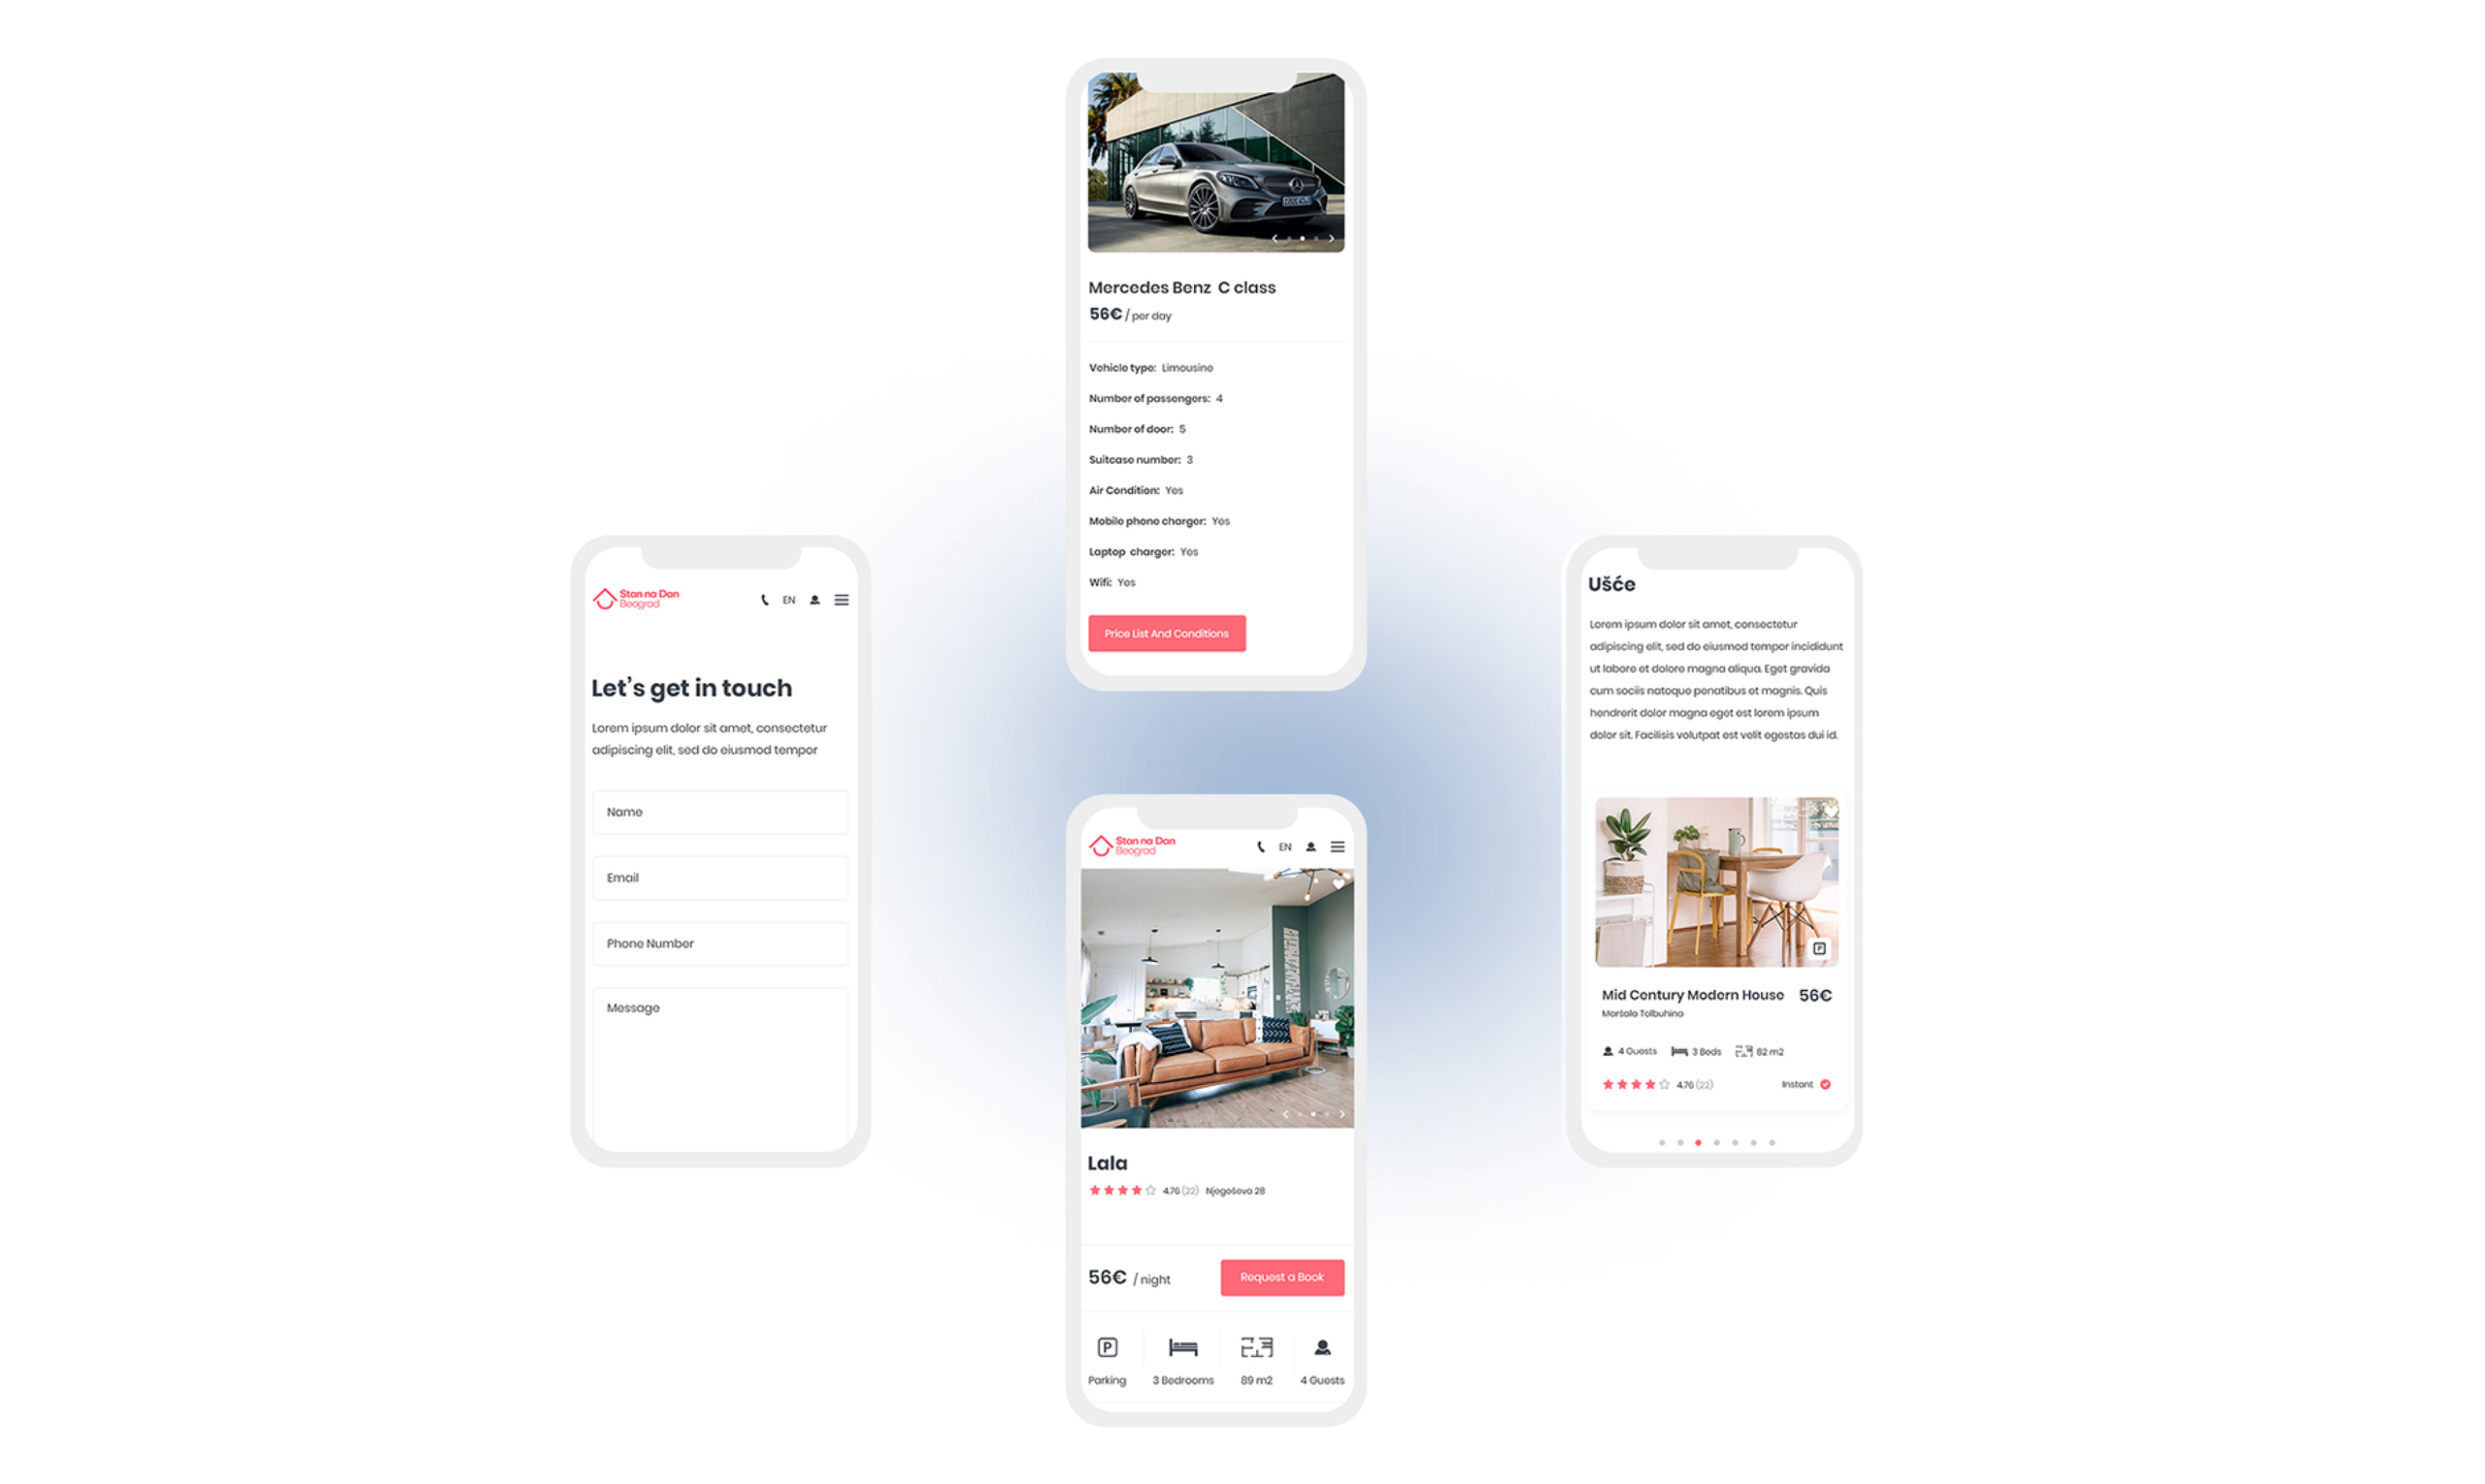 apartments are a multivendor system that looks great on mobile devices